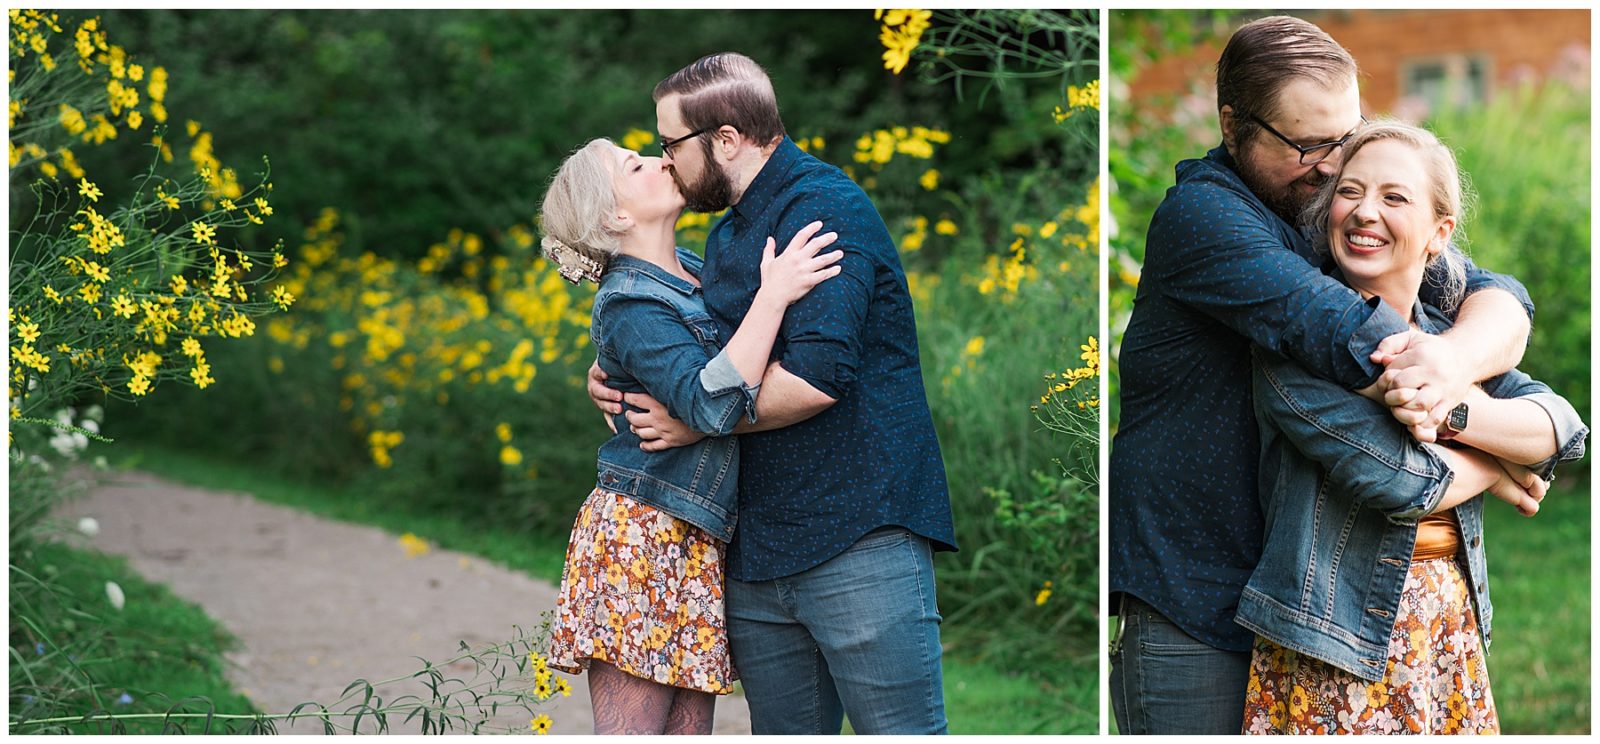 An August Ohio Engagement Session, fun and candid photos, engagement session outfit ideas, blue button down, jean jacket, outfit ideas, silly moments, wildflower field, metropark engagement session, golden hour